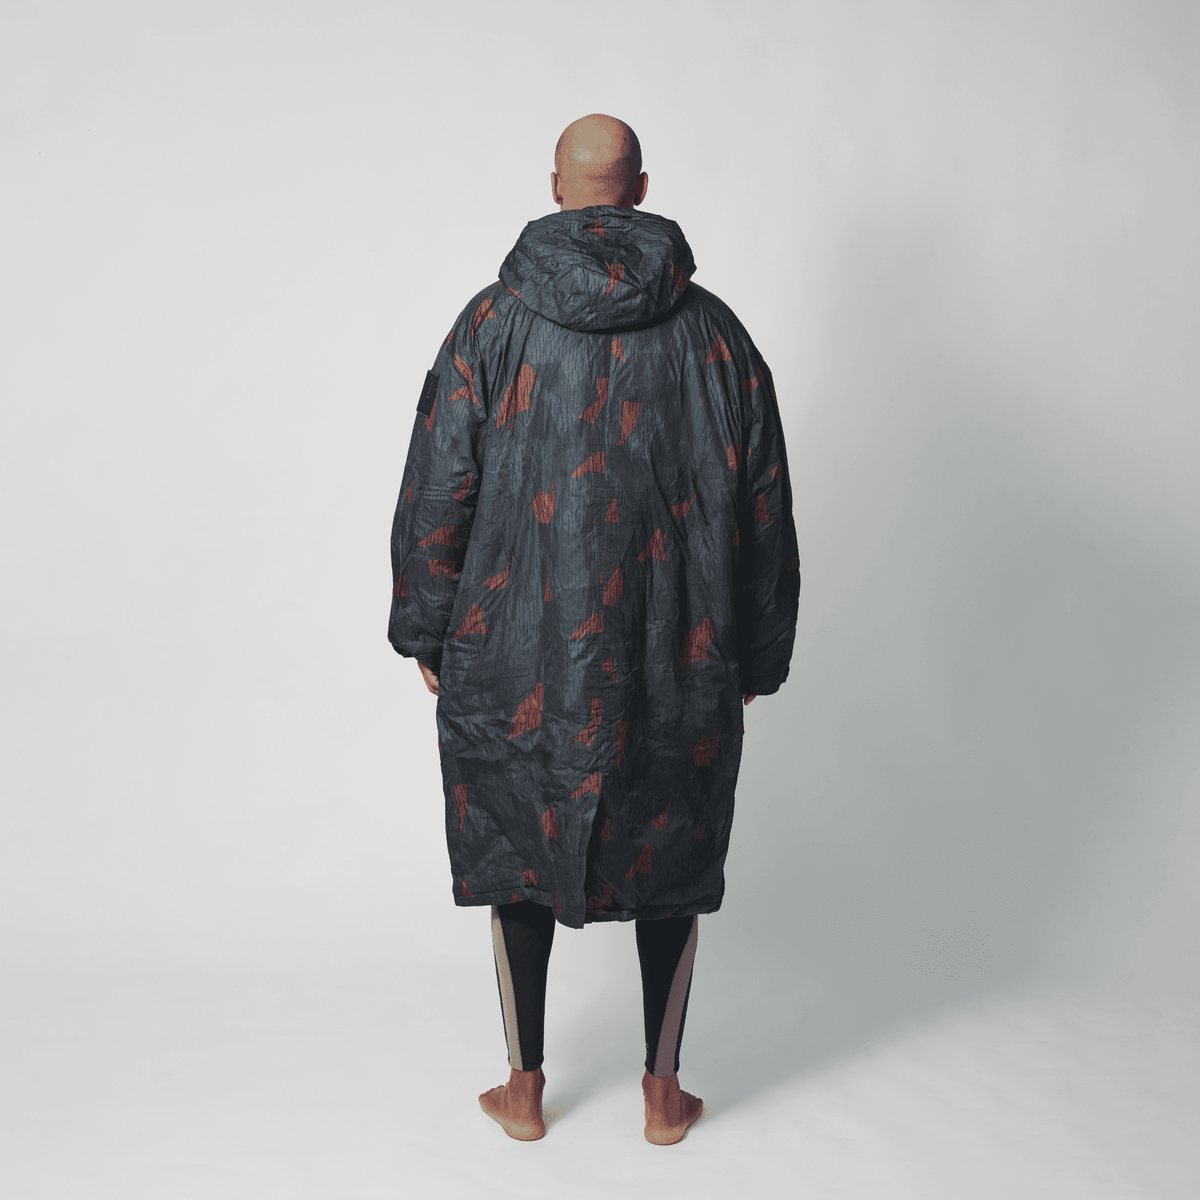 VOITED 2nd Edition Outdoor Change Robe & Drycoat for Surfing, Camping, Vanlife & Wild Swimming - Moment Camo Changewear VOITED 